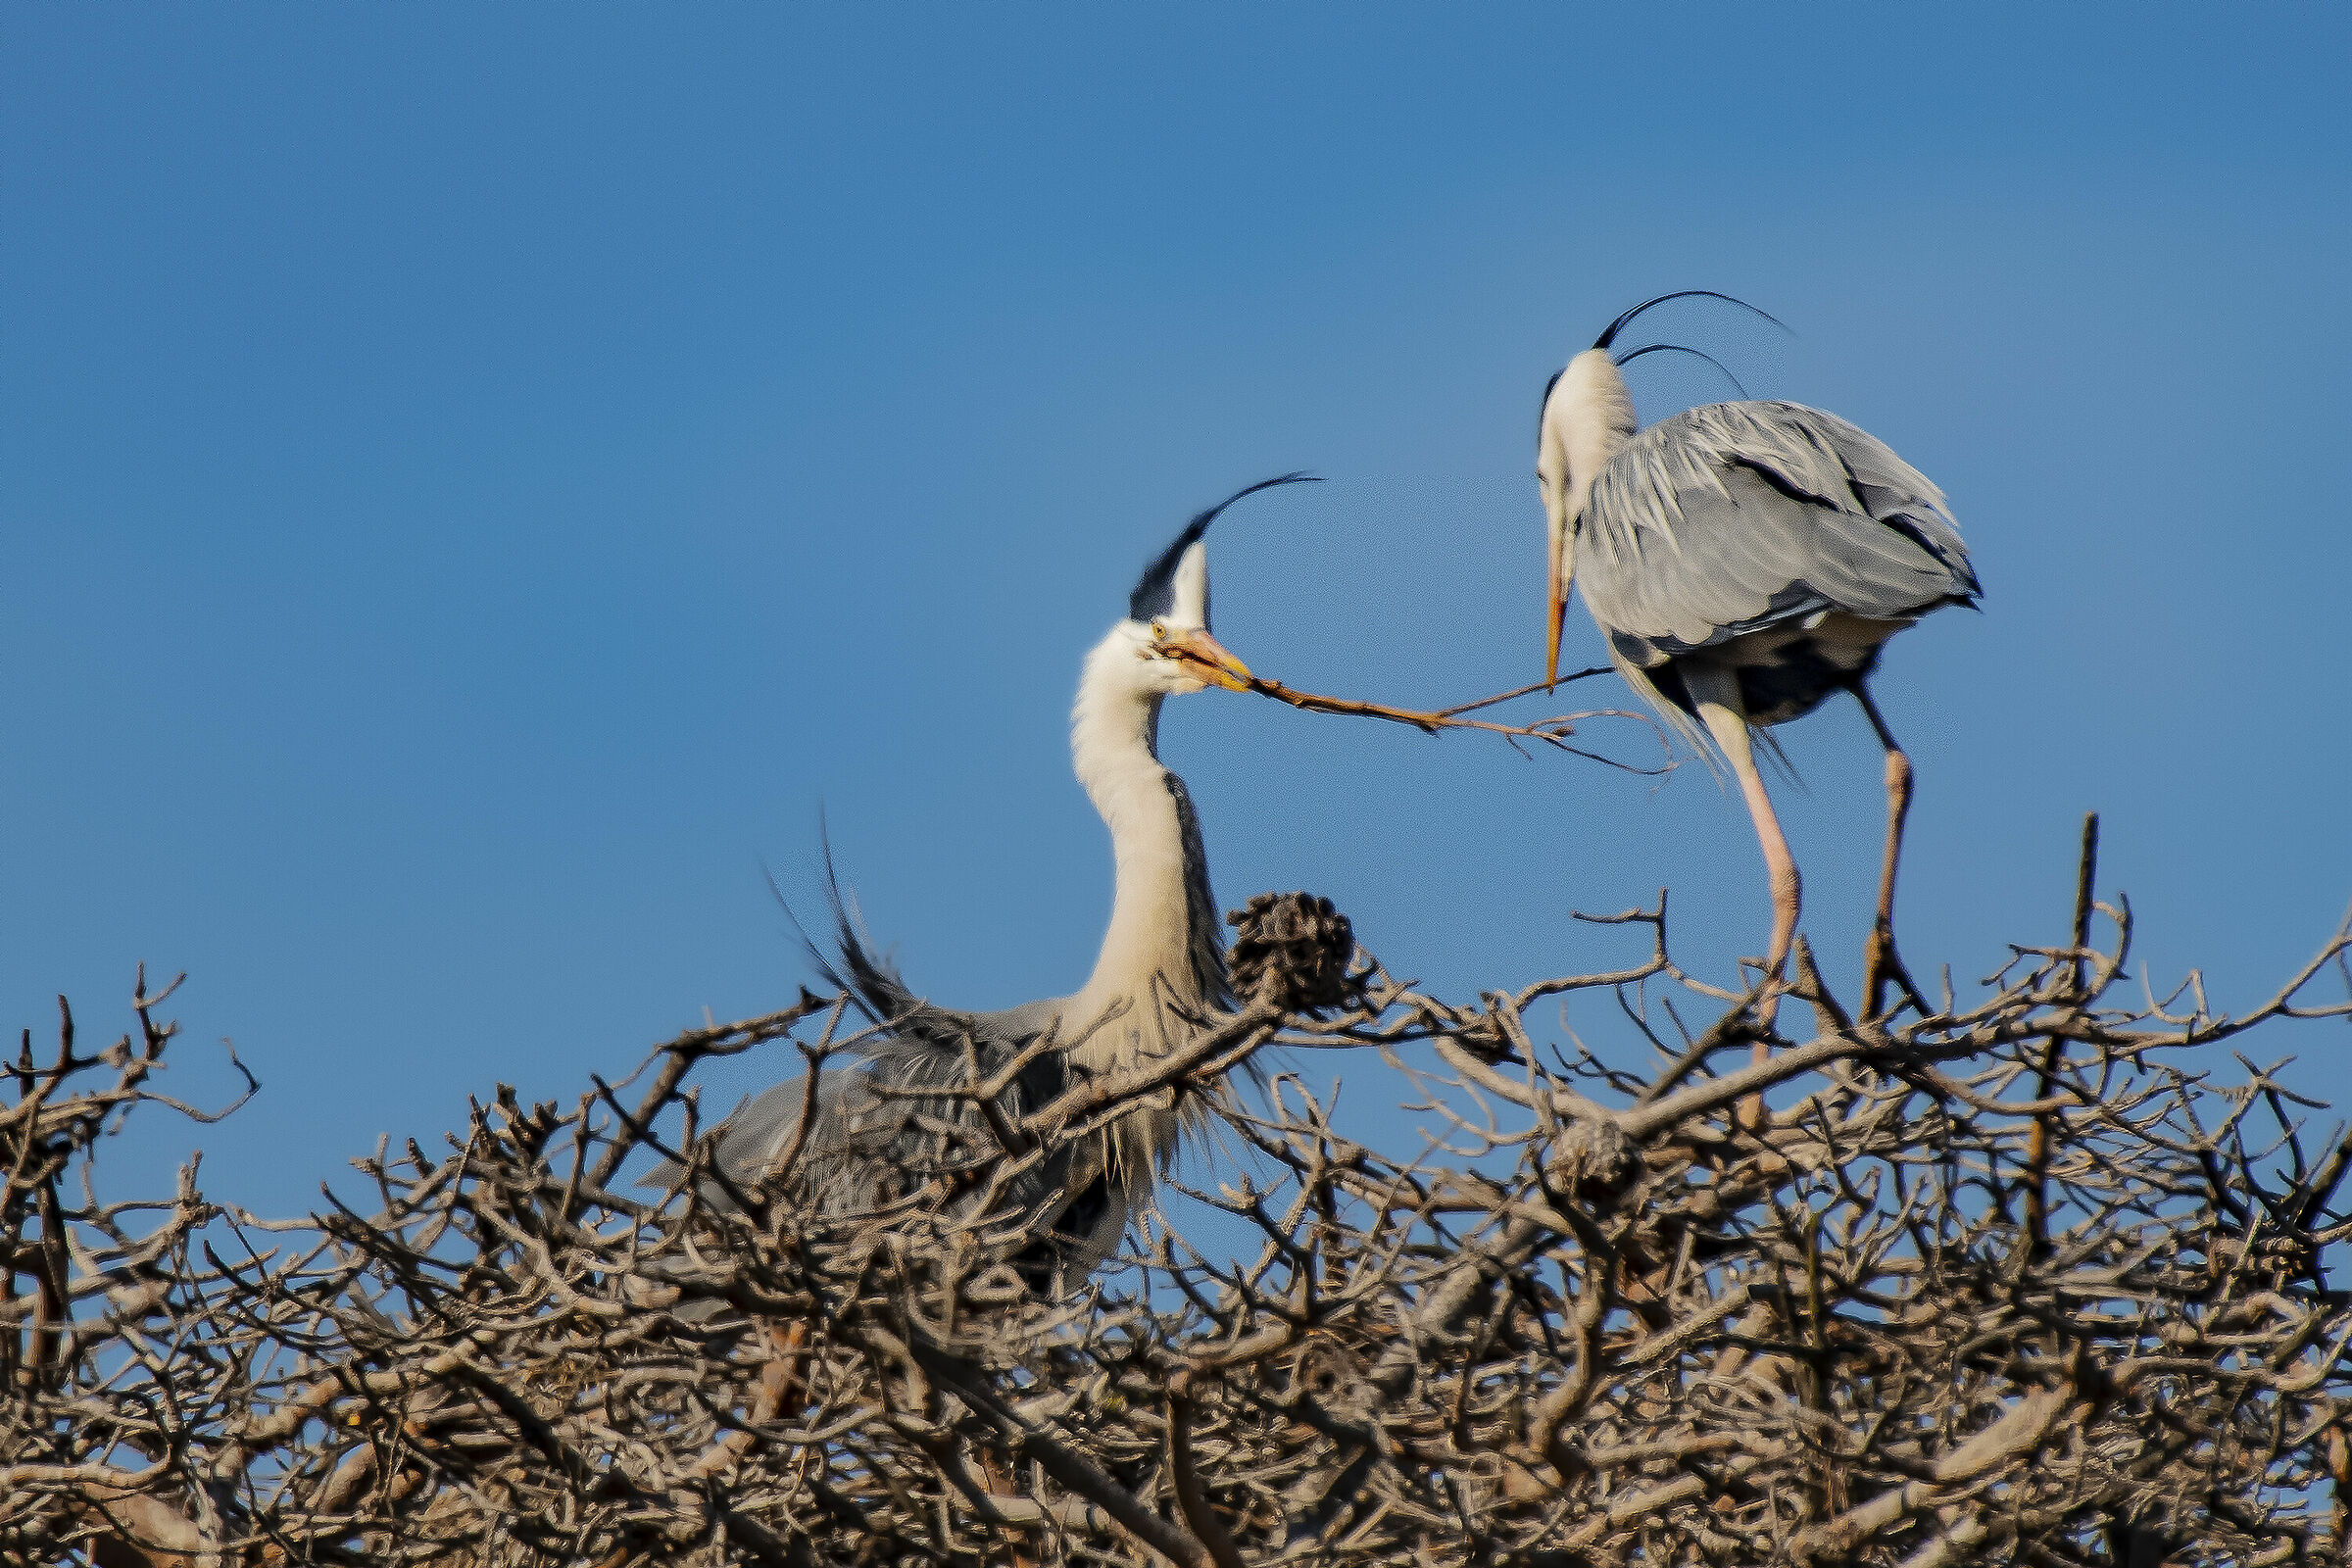 Herons Ashes on the Nest...